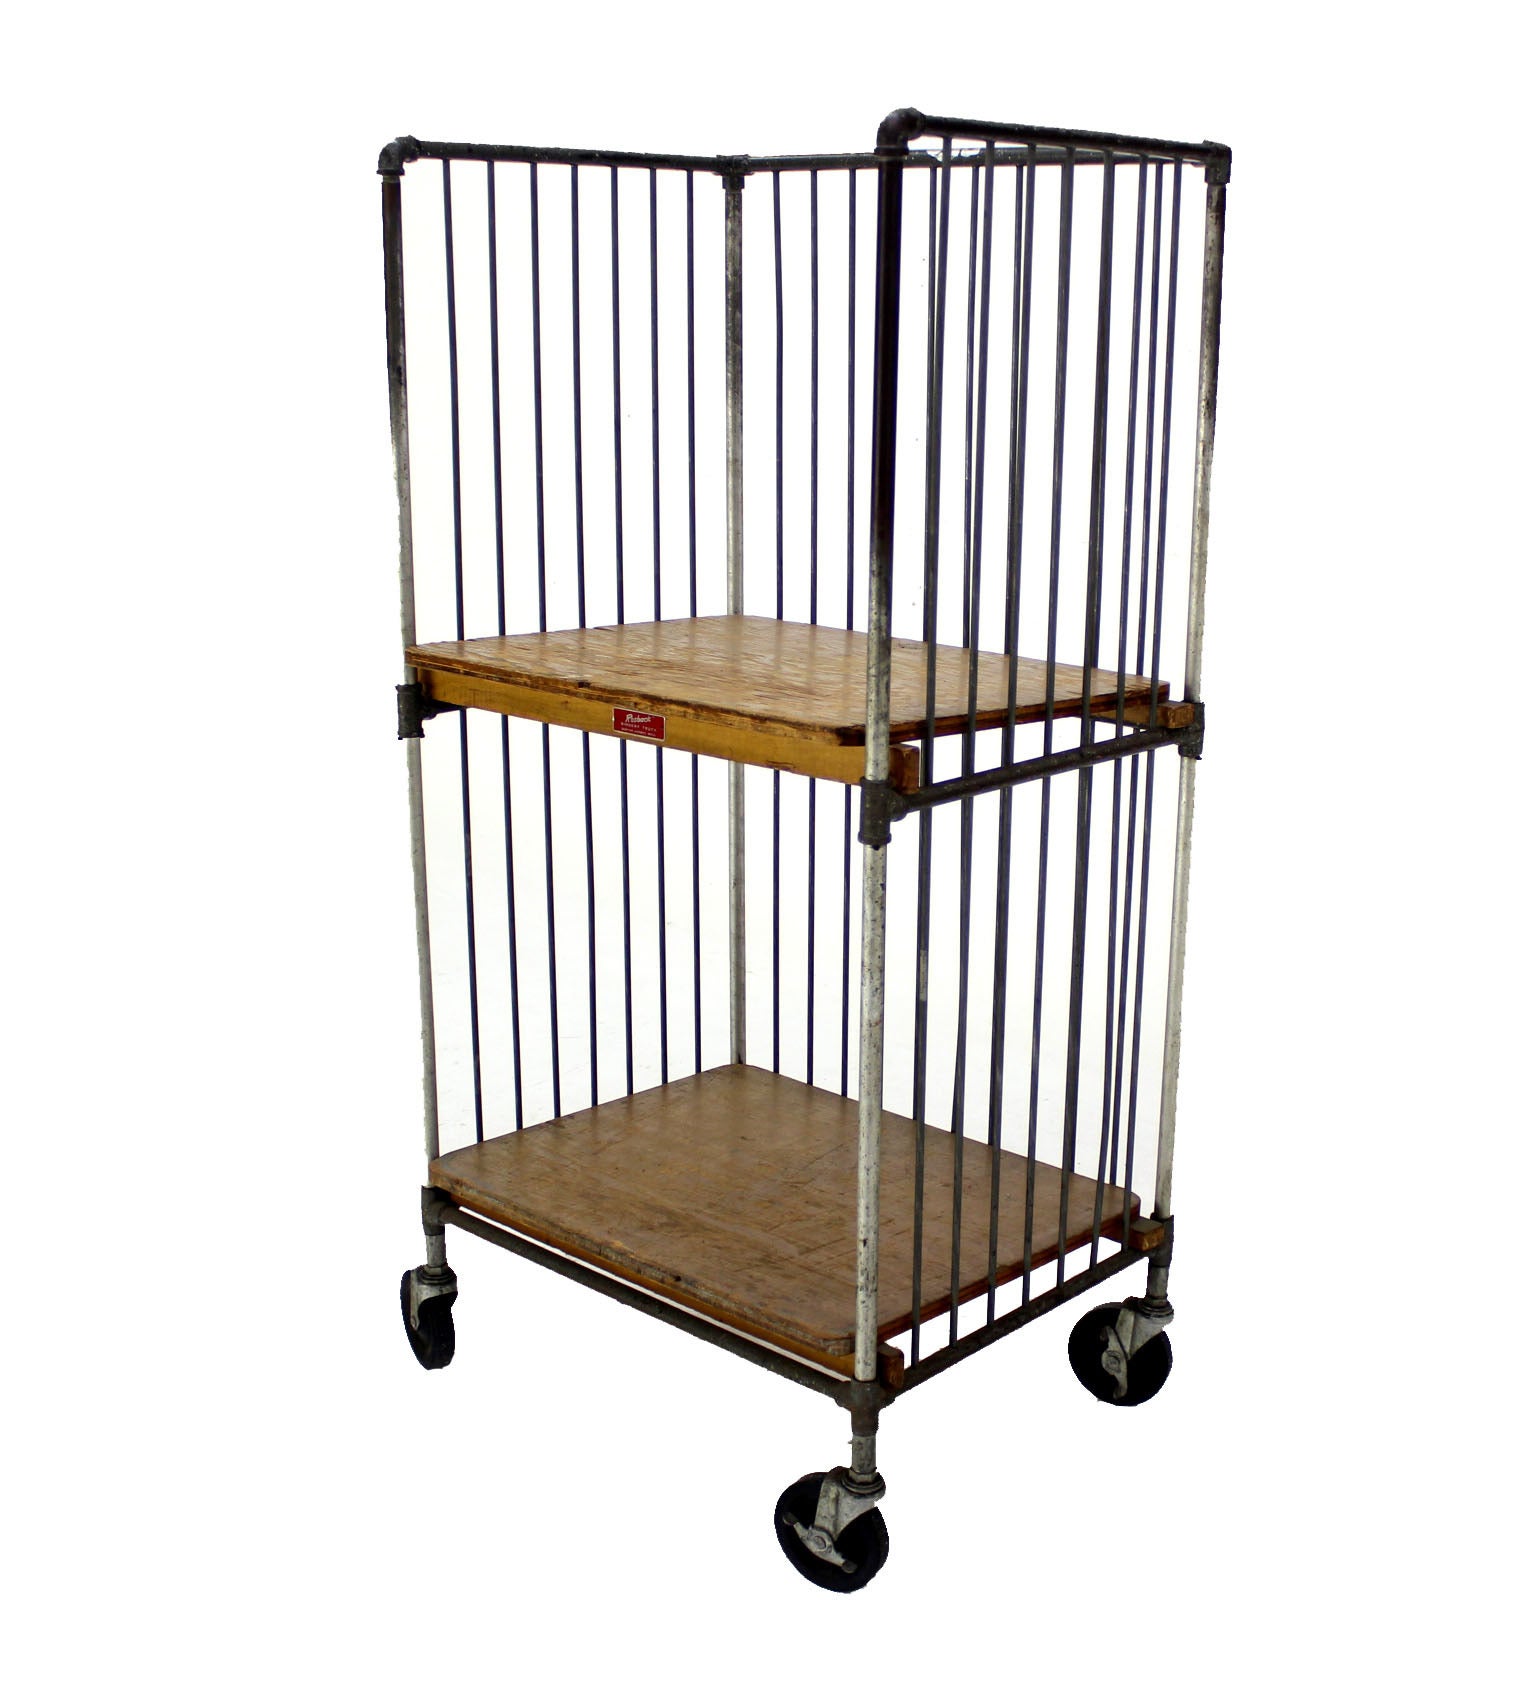 Heavy Industrial Mid-Century Modern Cart Rack with Storage Shelves